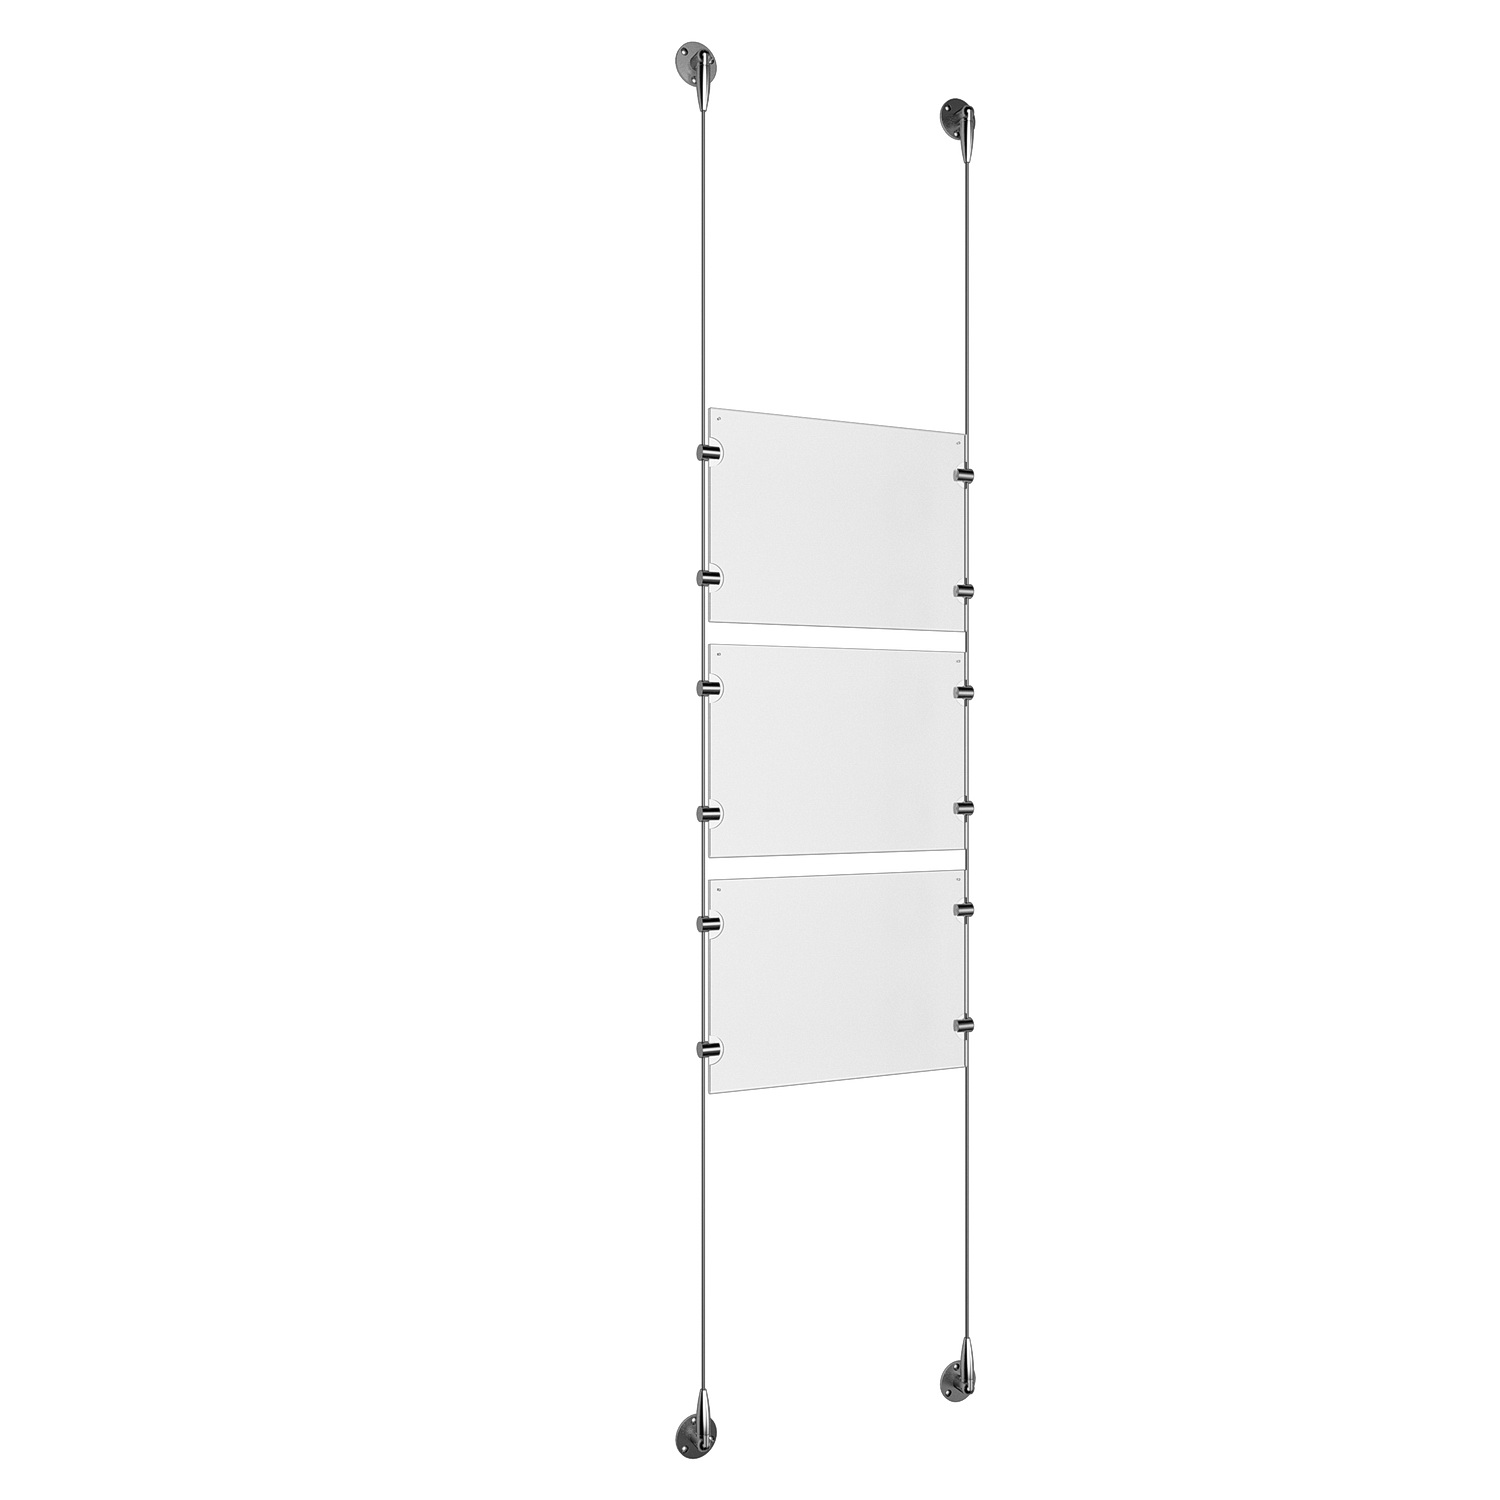 (3) 11'' Width x 8-1/2'' Height Clear Acrylic Frame & (2) Aluminum Clear Anodized Adjustable Angle Signature 1/8'' Diameter Cable Systems with (12) Single-Sided Panel Grippers